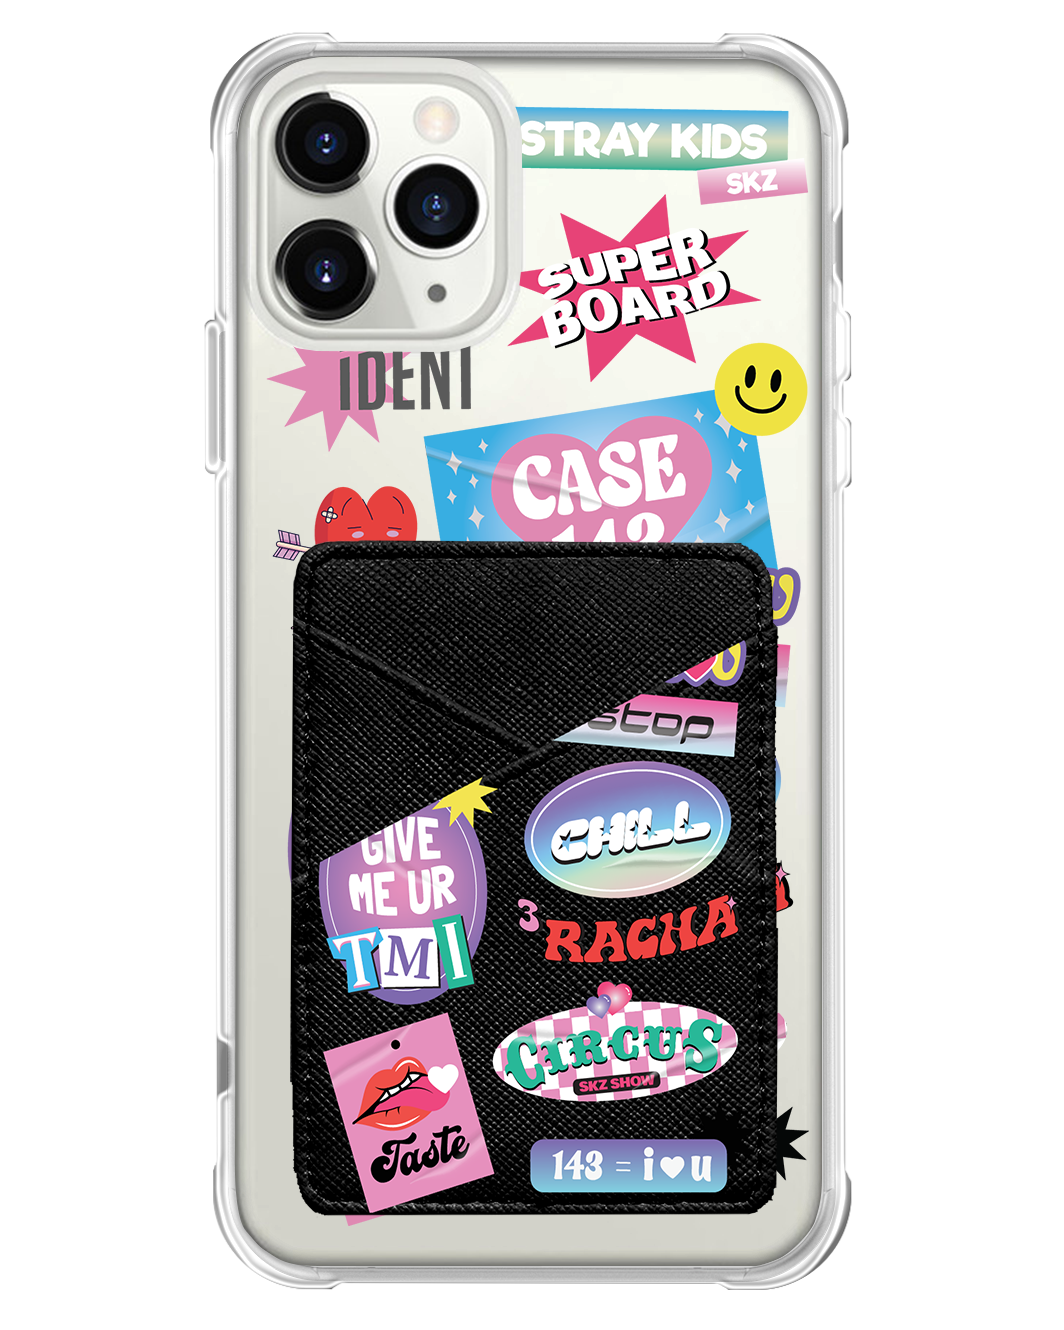 iPhone Phone Wallet Case - Stray Kids Case 143